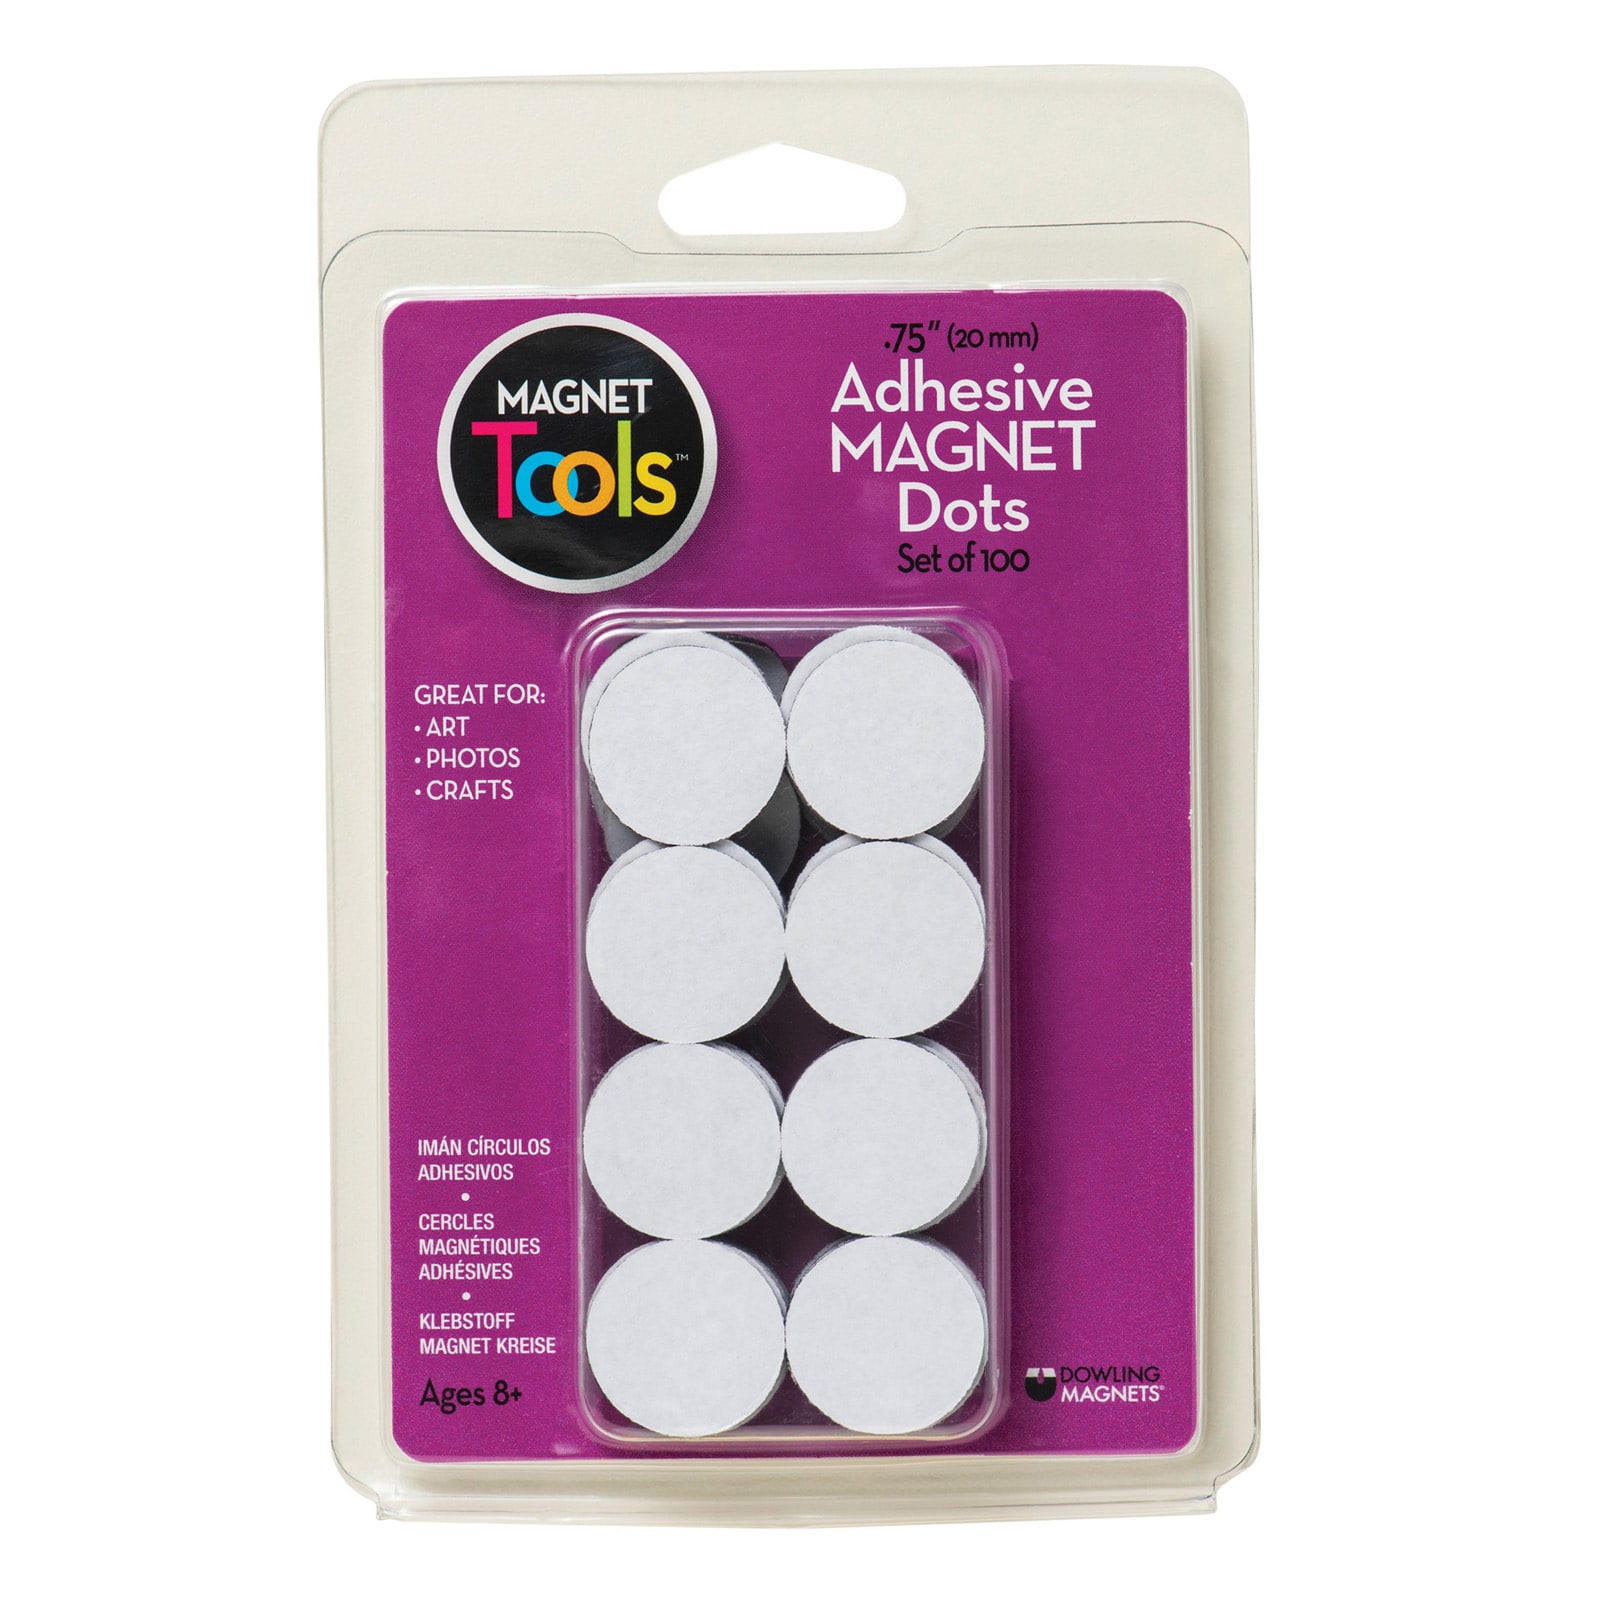 4 Packs: 6 Packs 100 ct. (2.400 total) Magnet Dots with Adhesive